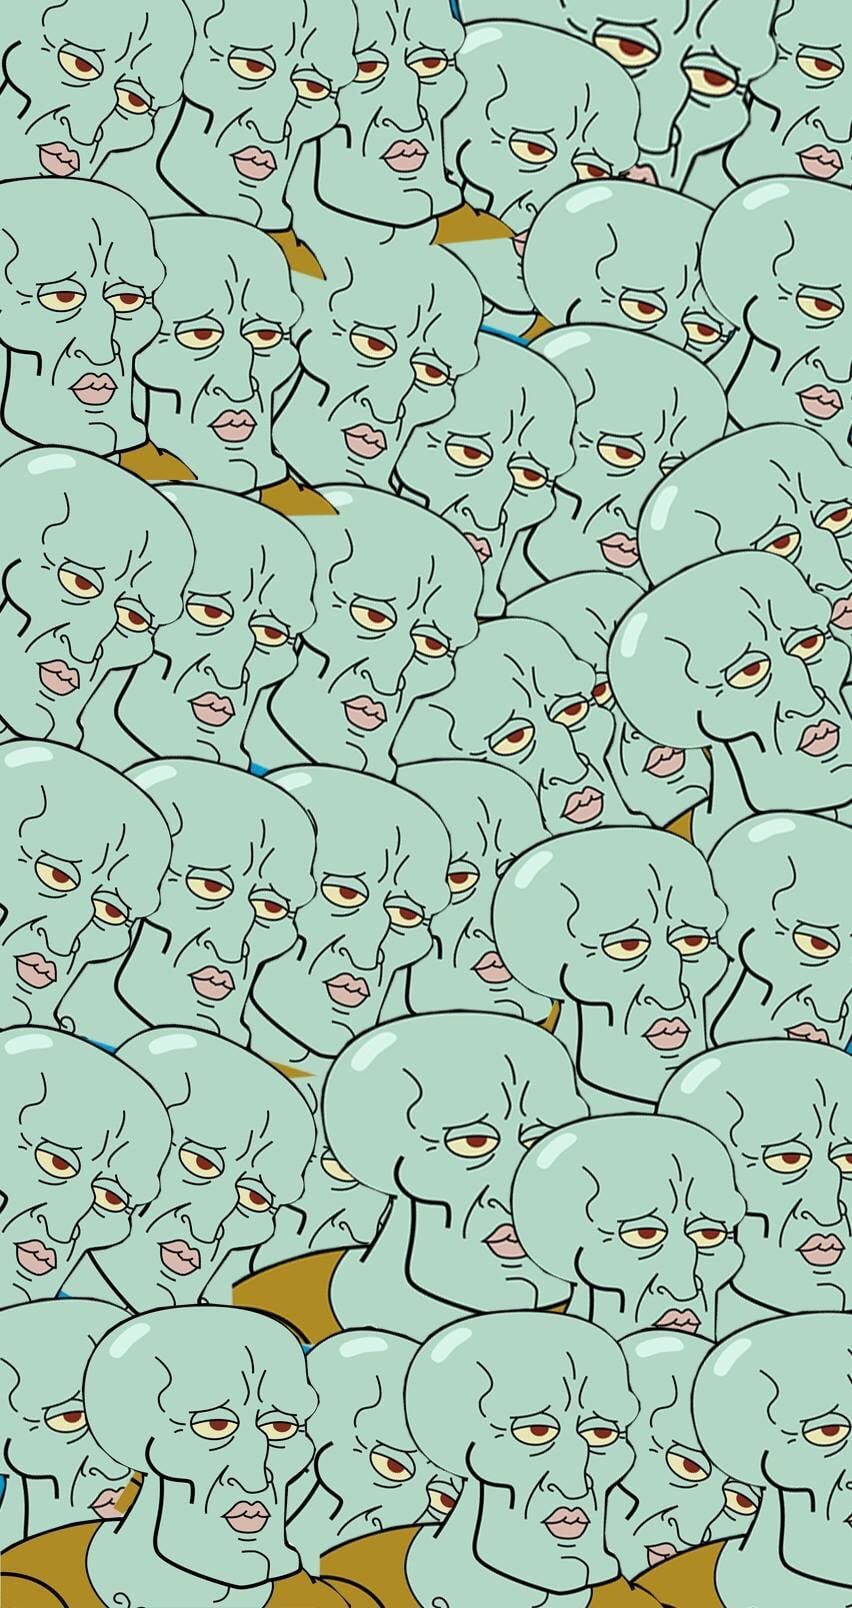 IPhone wallpaper of a bunch of Squidward from Spongebob - Squidward